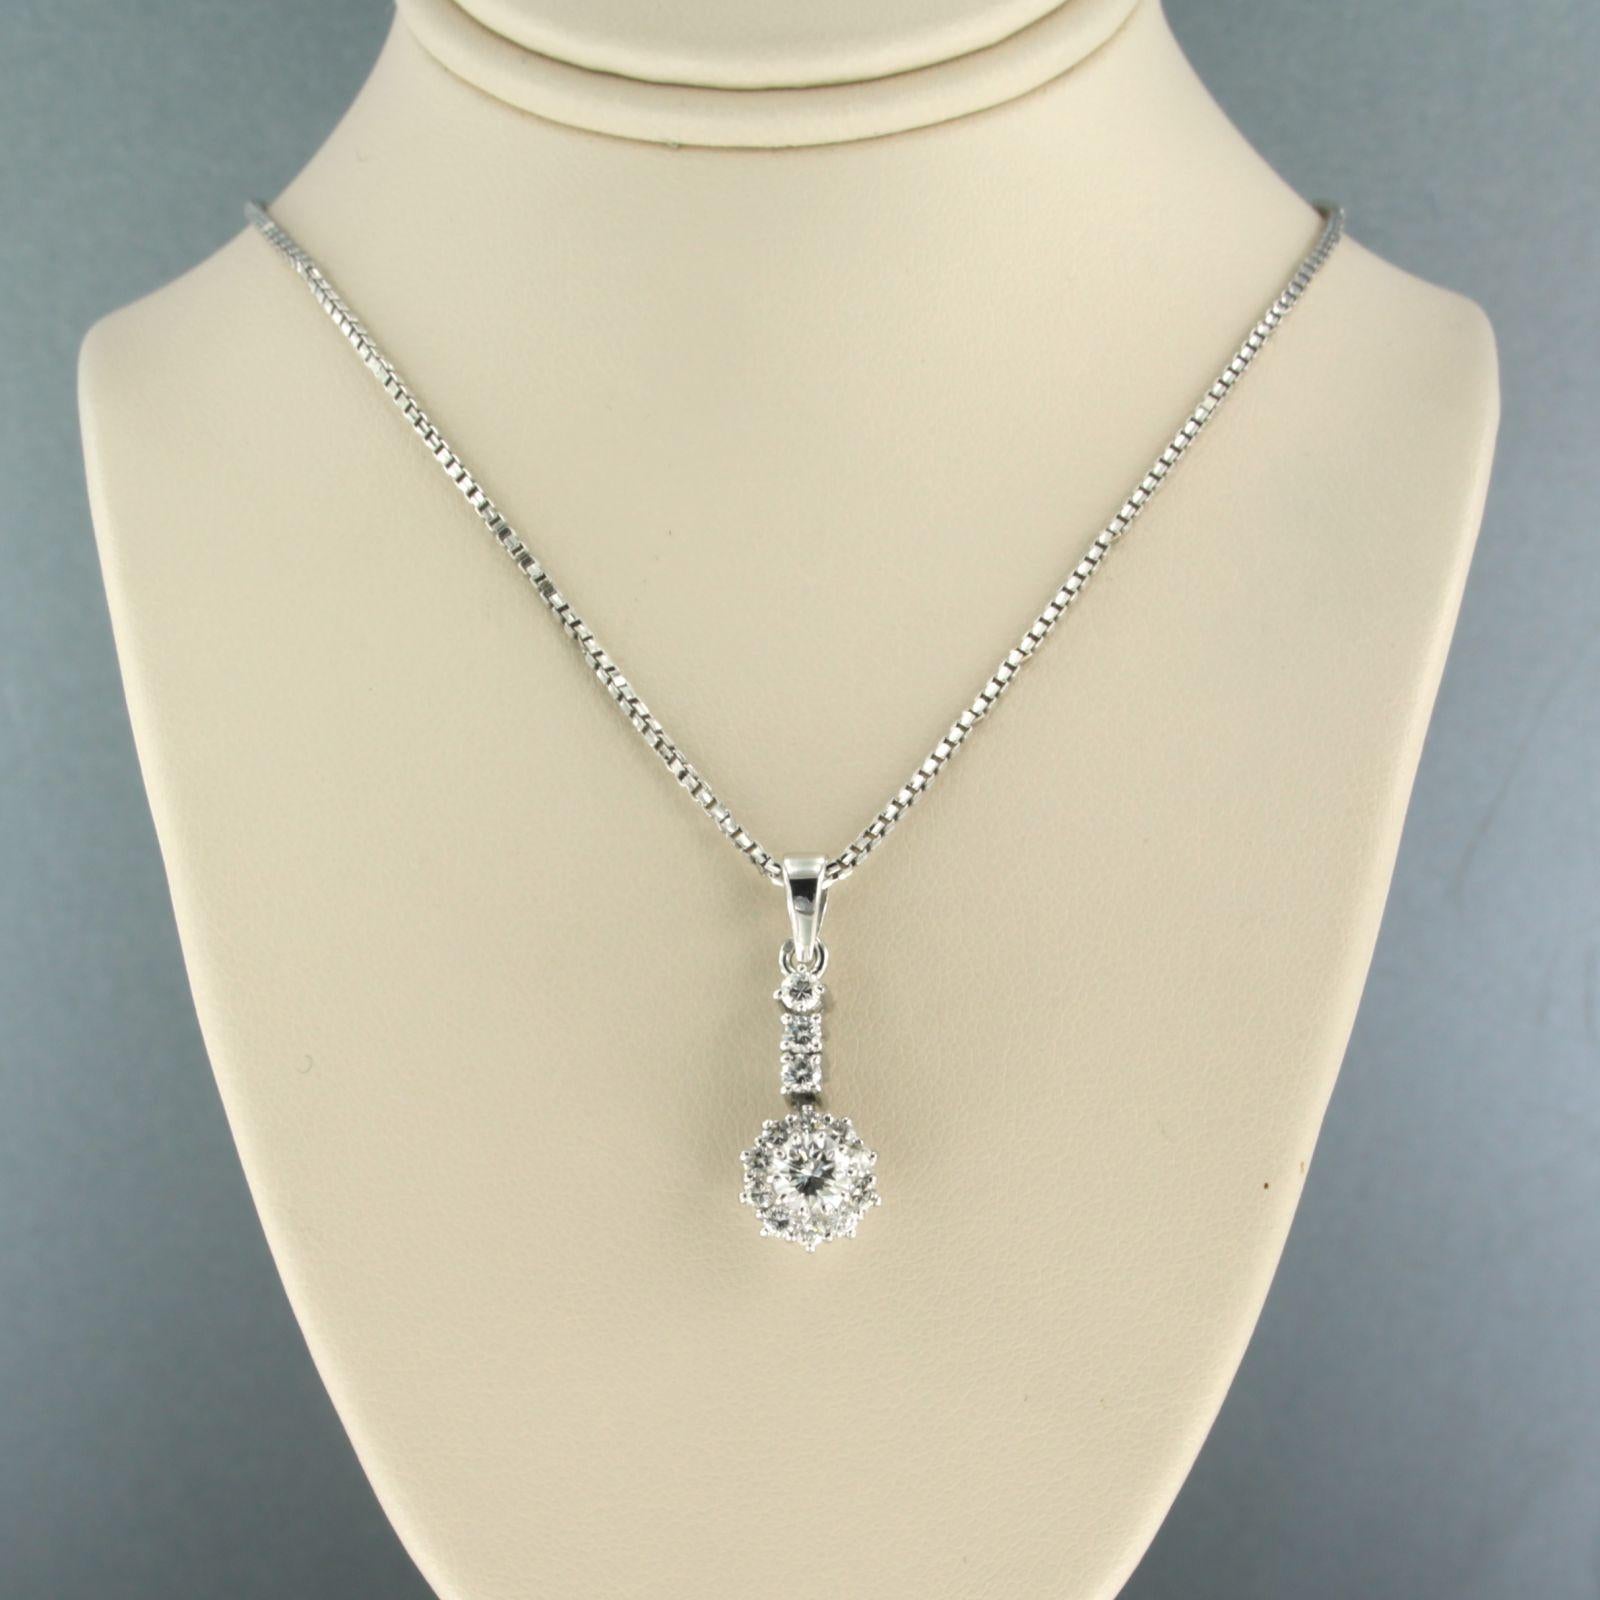 14k white gold necklace with an 18k white gold pendant set with brilliant cut diamonds up to. 1.16ct - F/G - VS/SI - 50 cm long

detailed description:

the size of the pendant is 2.5 cm long by 1.0 cm wide

Necklace is 1.3 mm wide and 50 cm